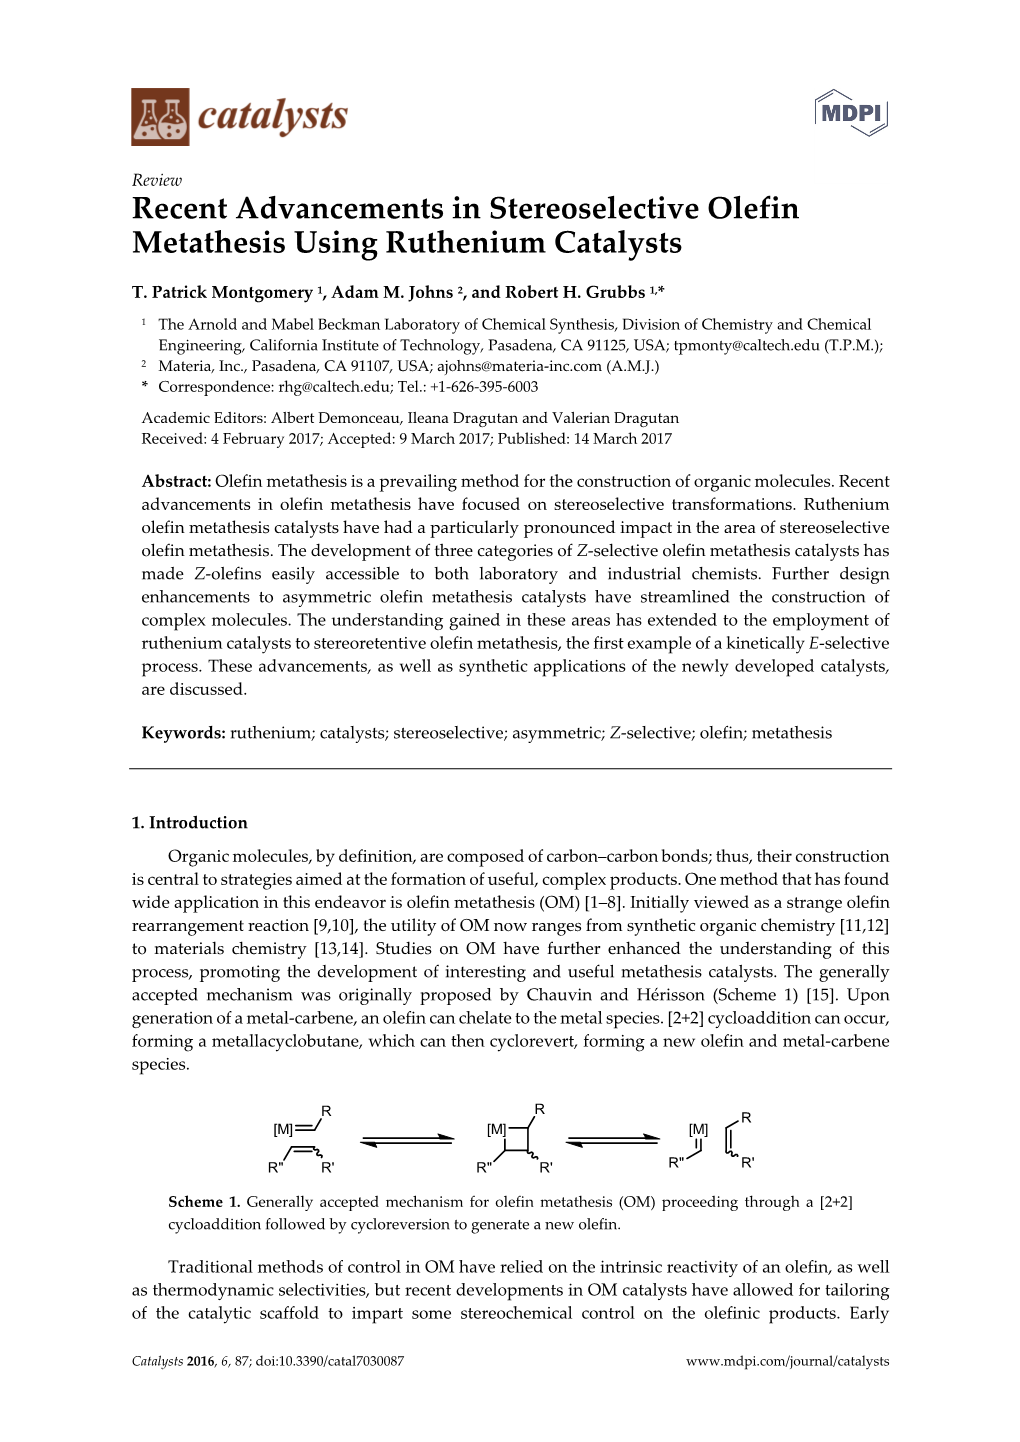 Recent Advancements in Stereoselective Olefin Metathesis Using Ruthenium Catalysts